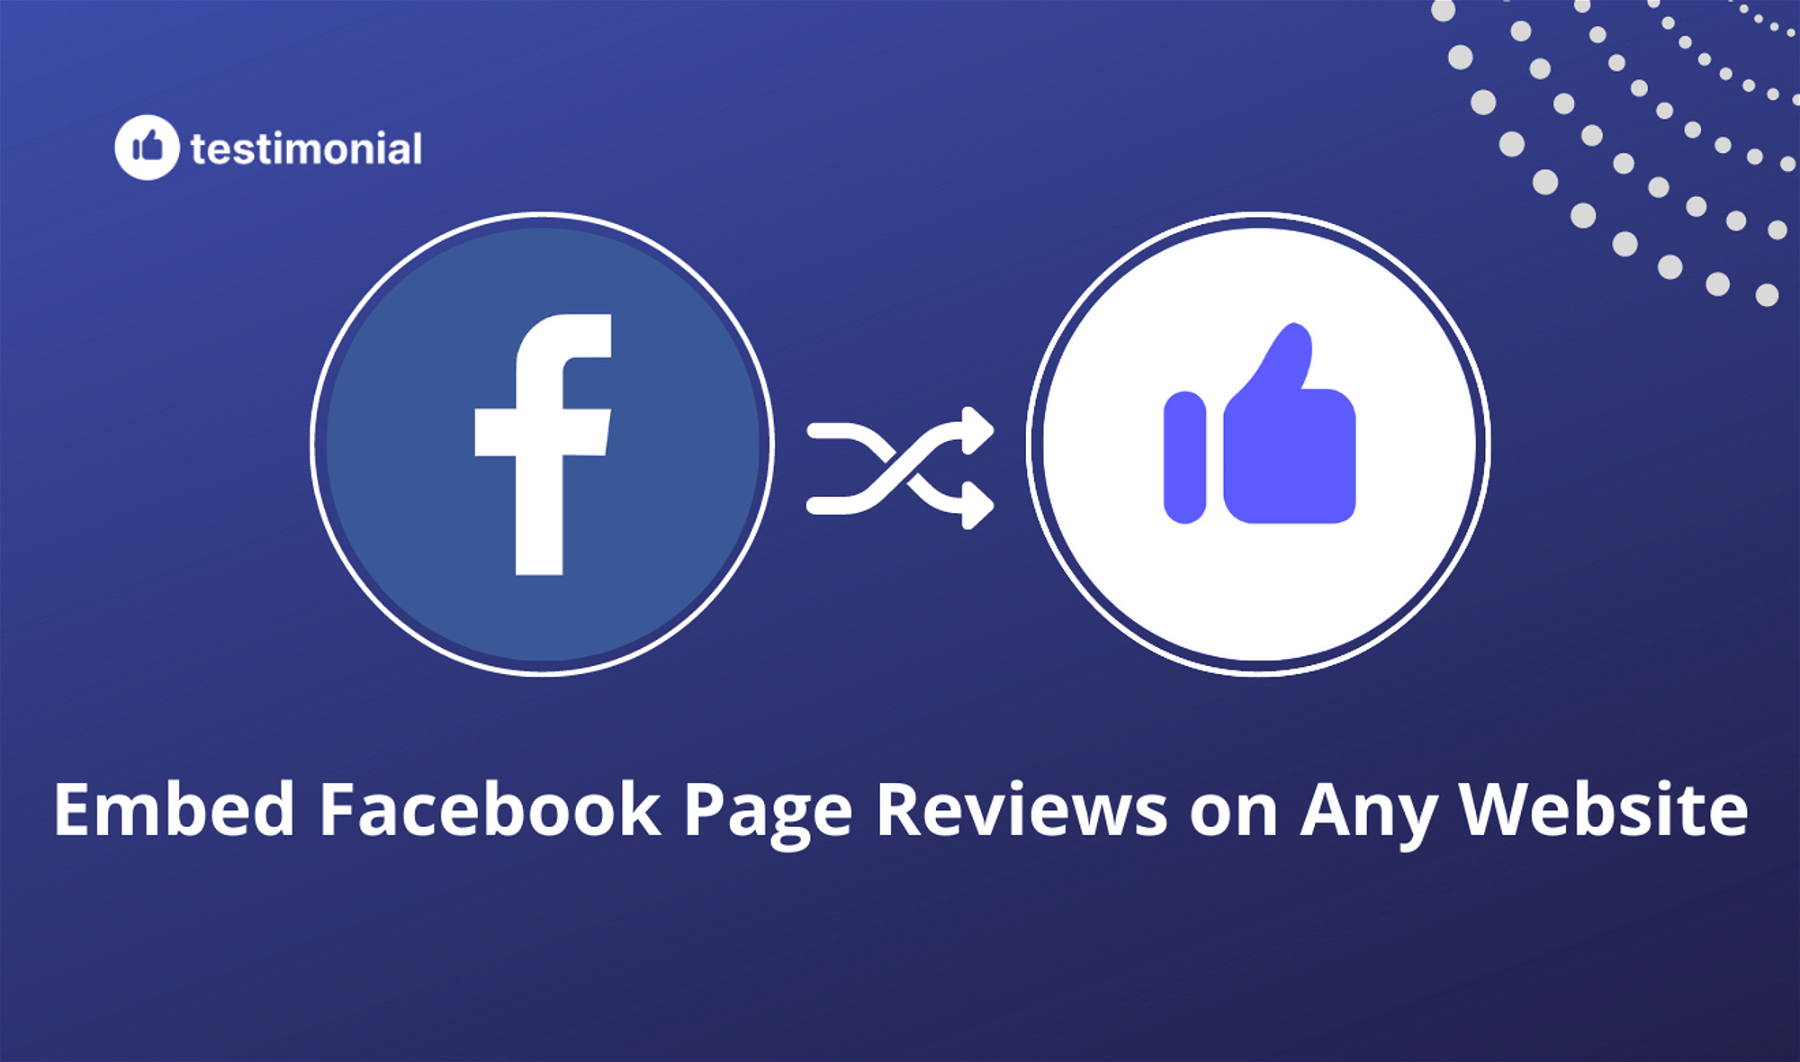 How to embed Facebook Page Reviews on Your Website